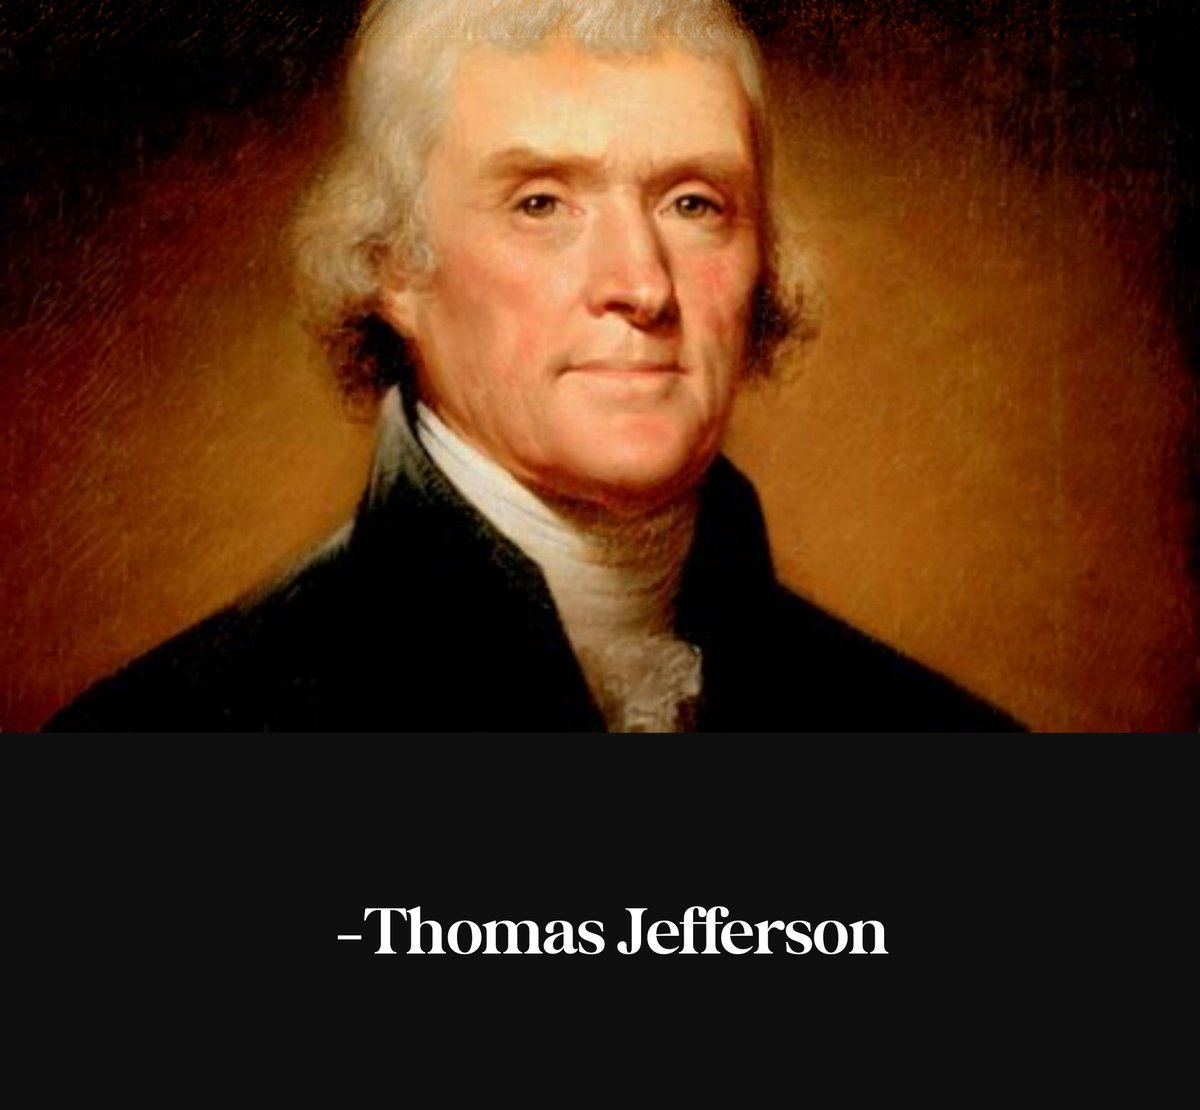 “If there be any among us who wish to dissolve the Union or to change its republican form, let them stand undisturbed as monuments of the safety with which error of opinion may be tolerated where reason is free to combat it.' Thomas Jefferson, Mar 4,1801 #History #Wednesdayvibe